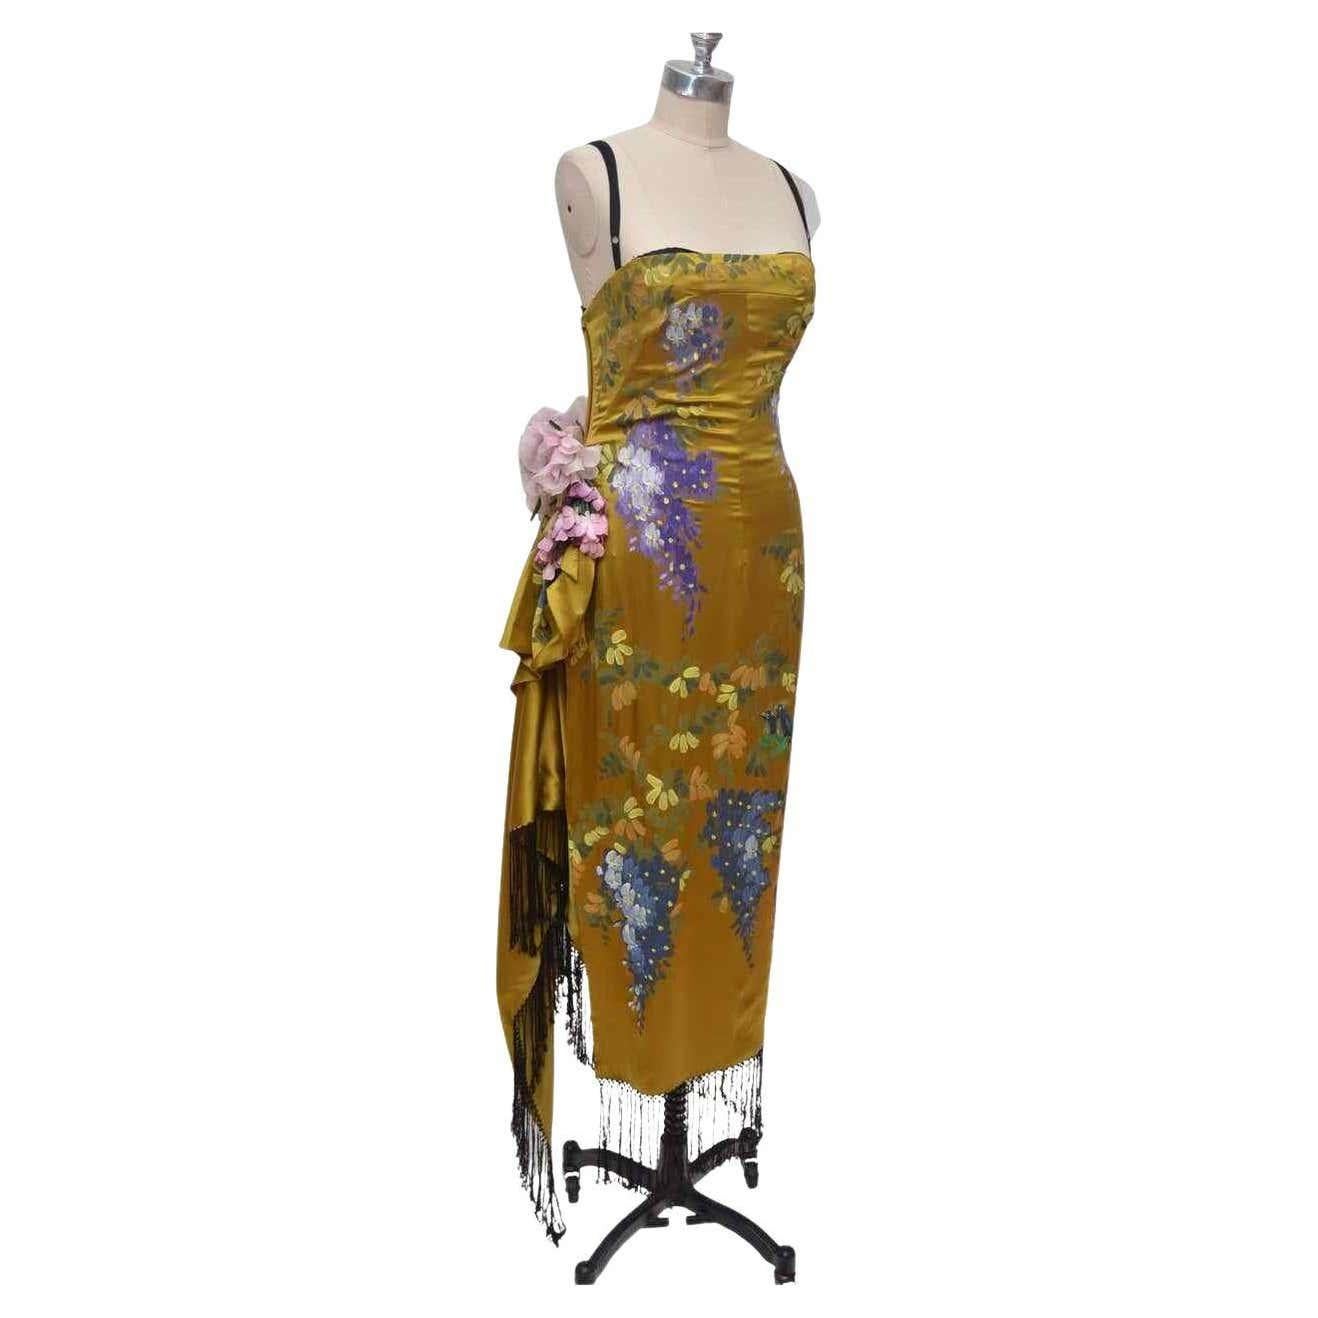 Dolce Gabbana Yellow Gold silk dress 1998  Hand-painted with flowers and birds and flowers on the side. 
Condition is very good Pictured on mannequin size 4-6 US.No size label. 
Mannequin waist is about 27